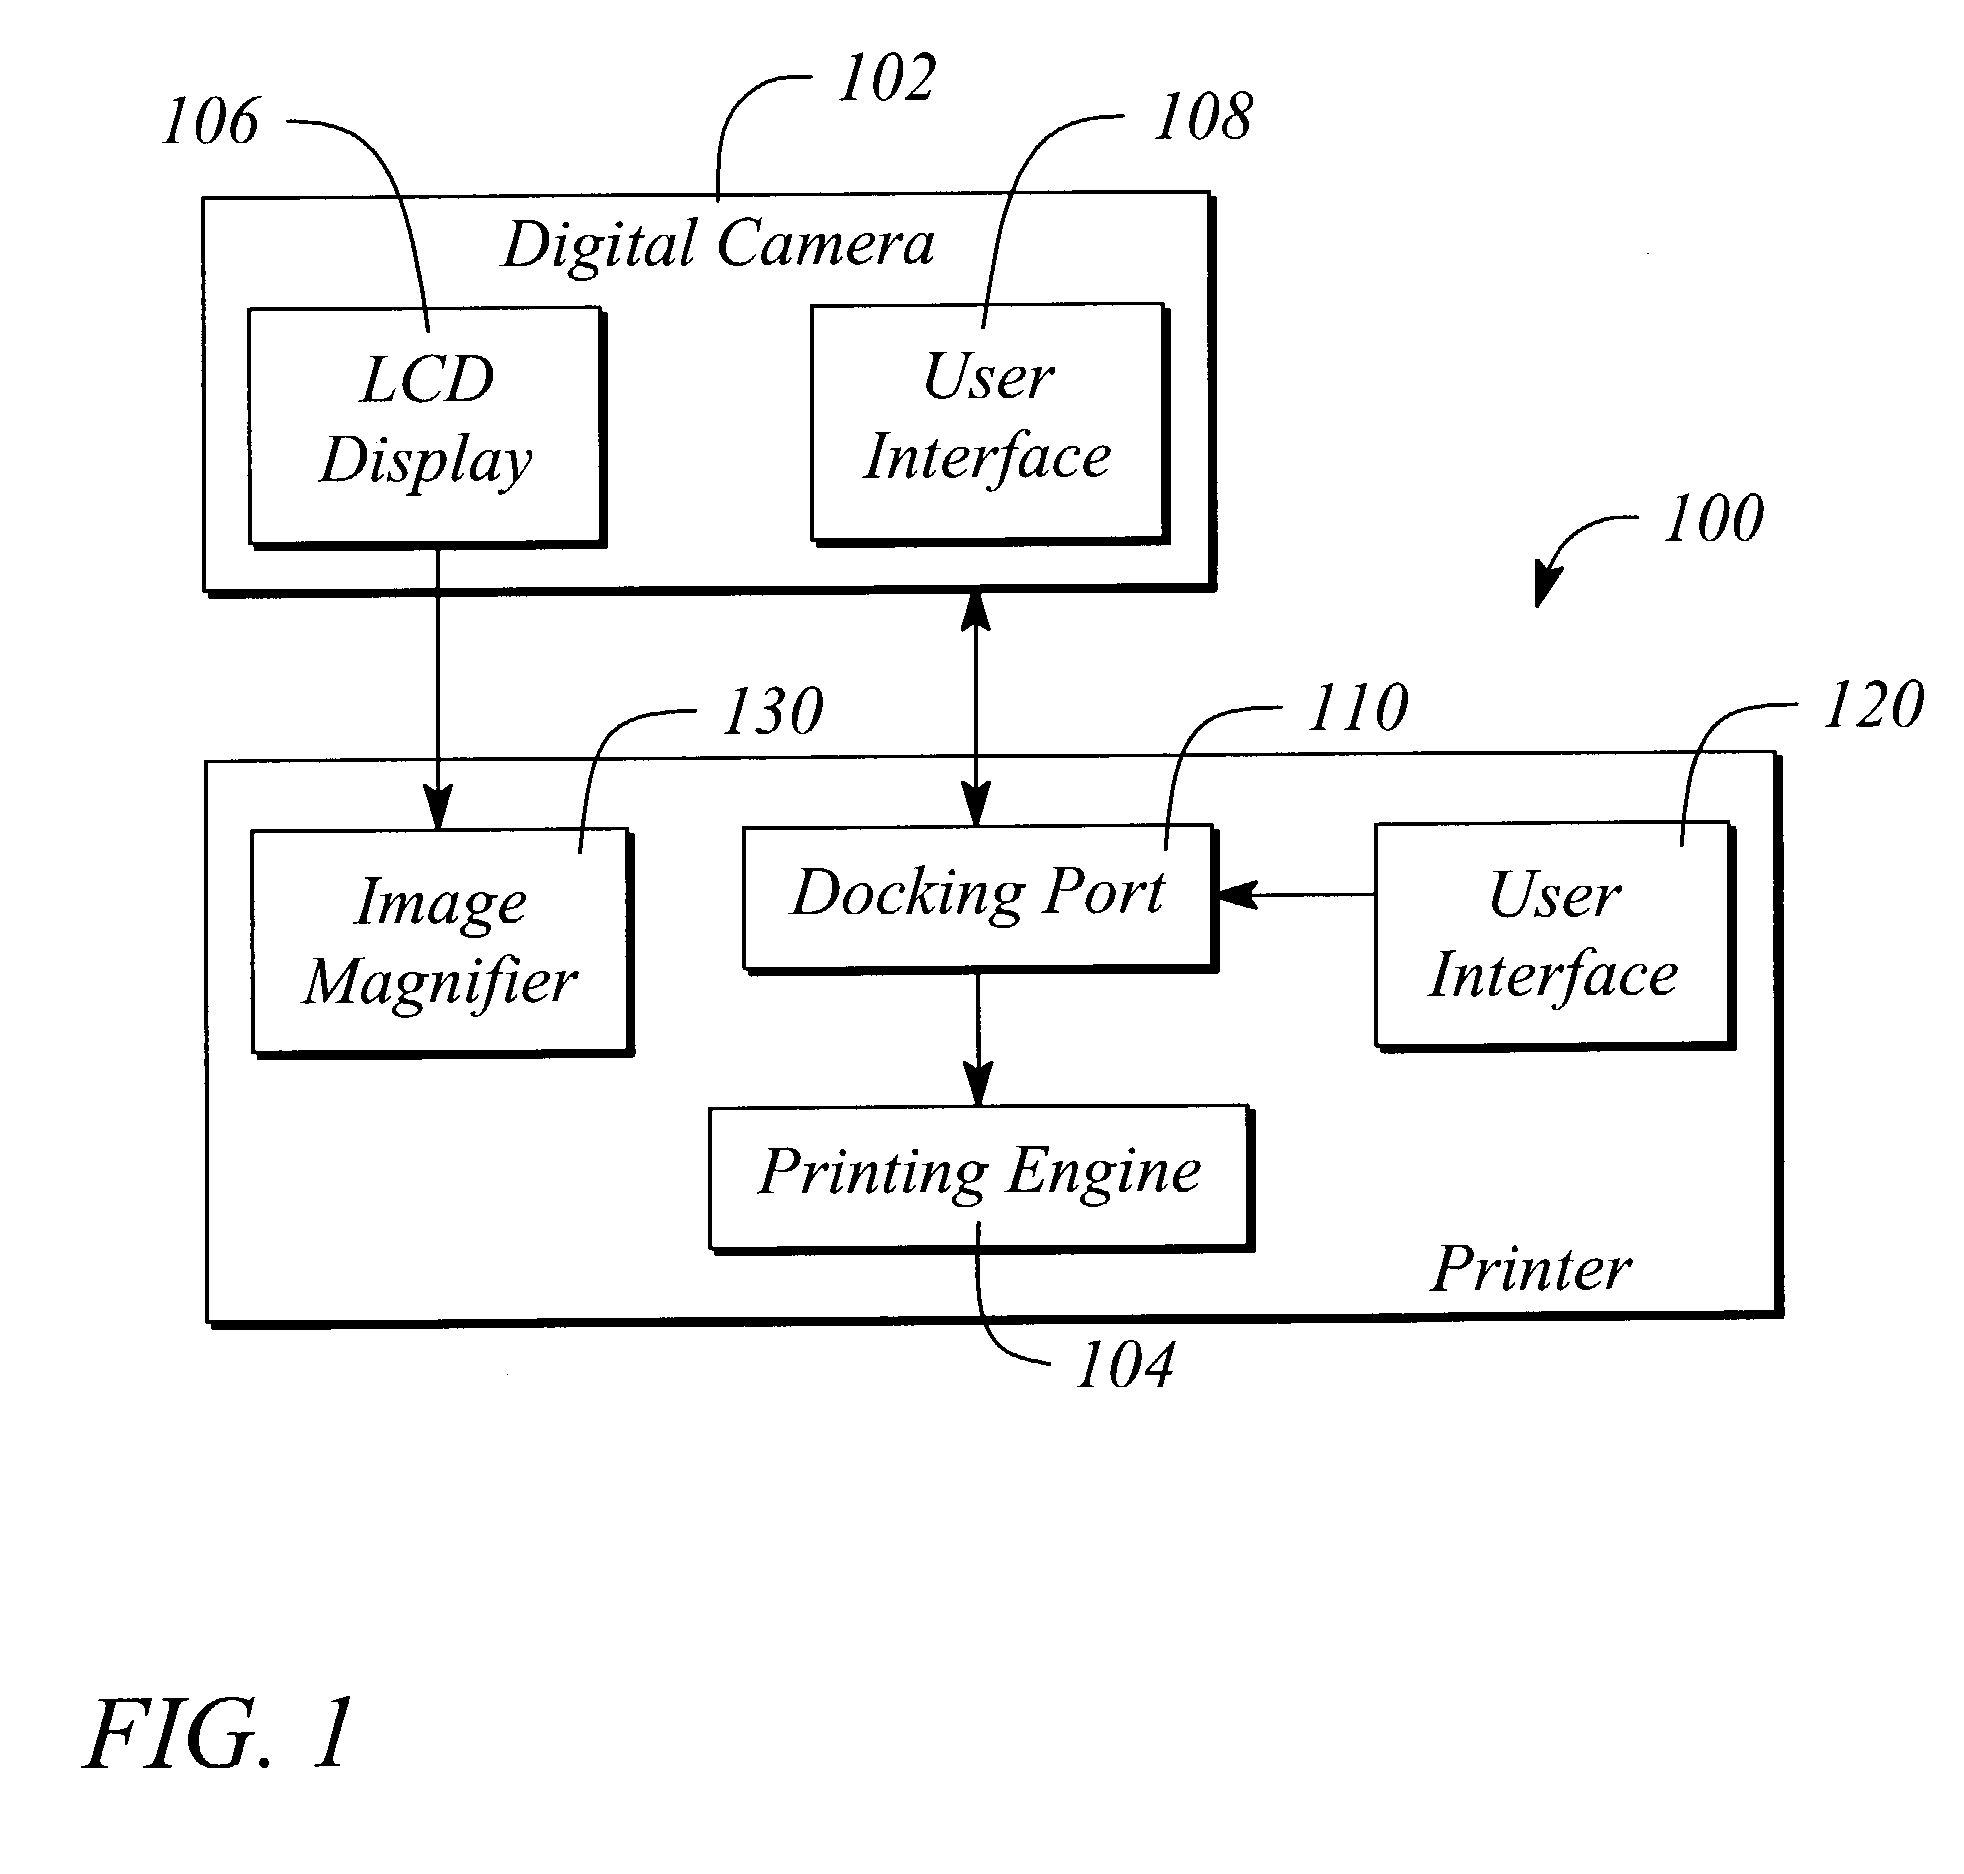 Printer and docking station having a digital camera docking port with an image magnifier